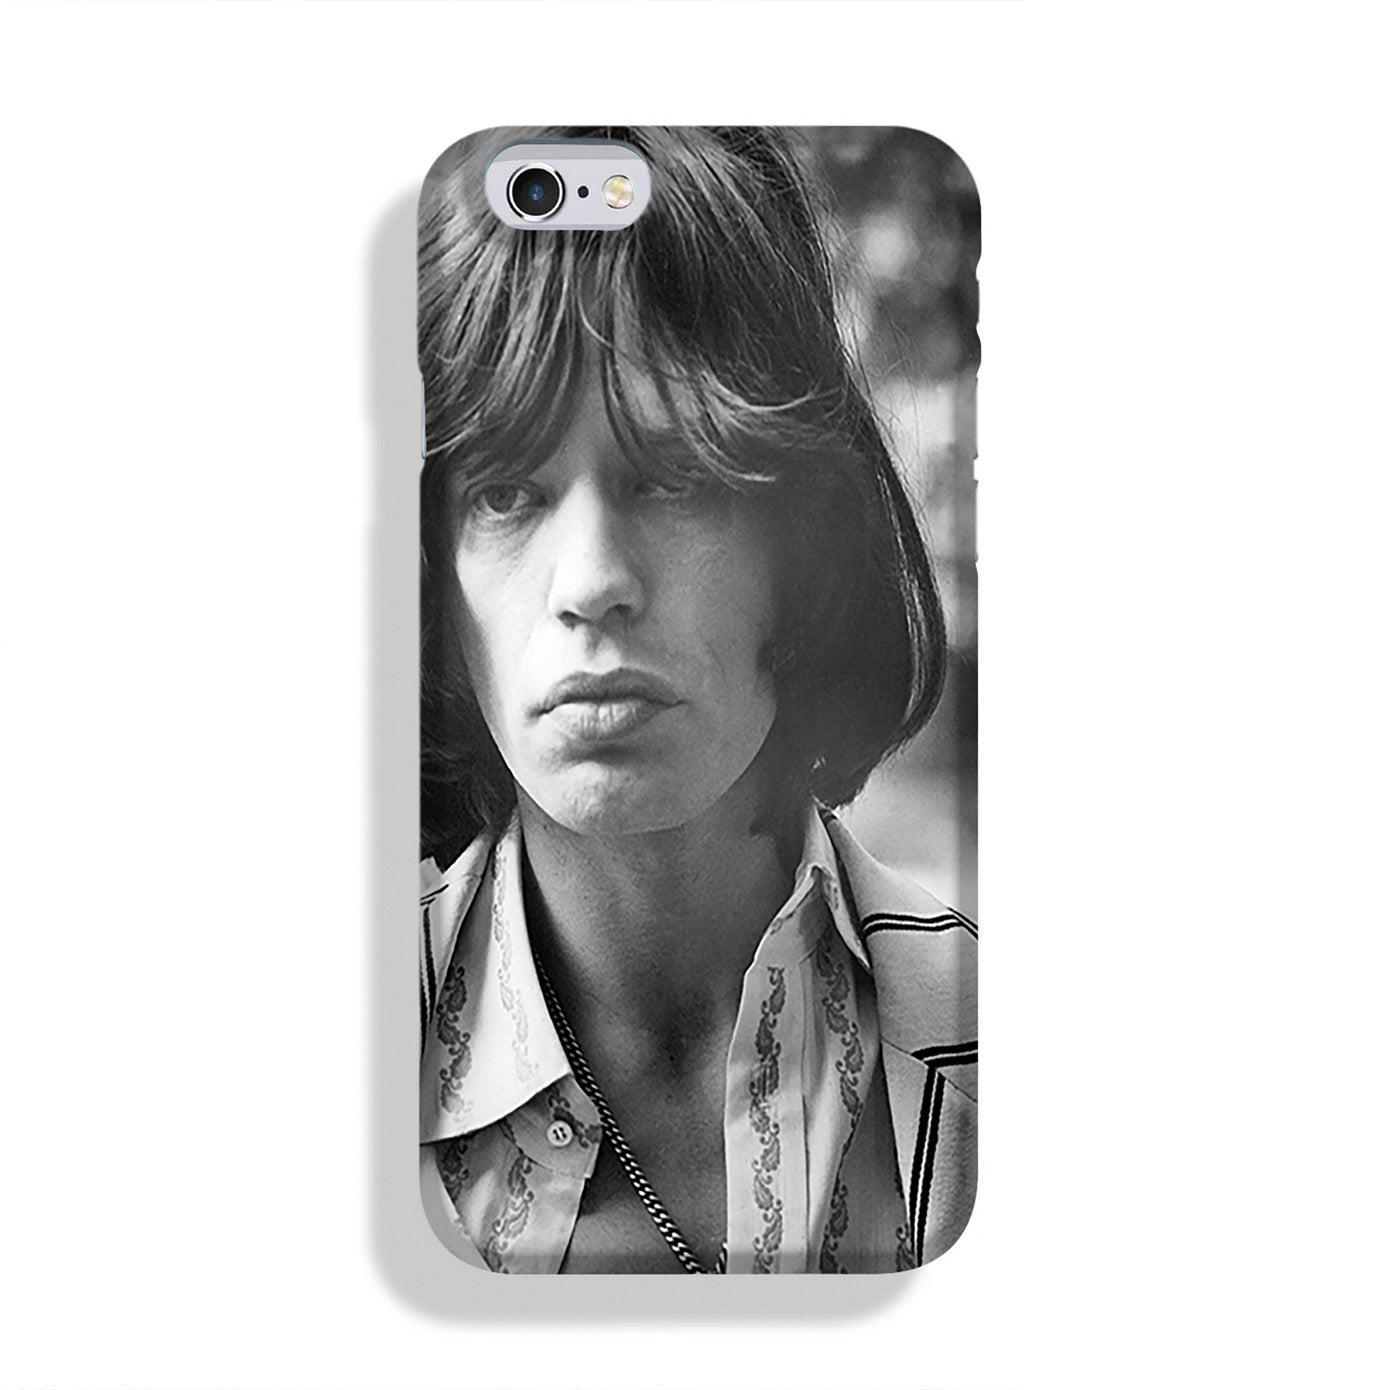 Mick Jagger in 1969 Phone Case iPhone 6